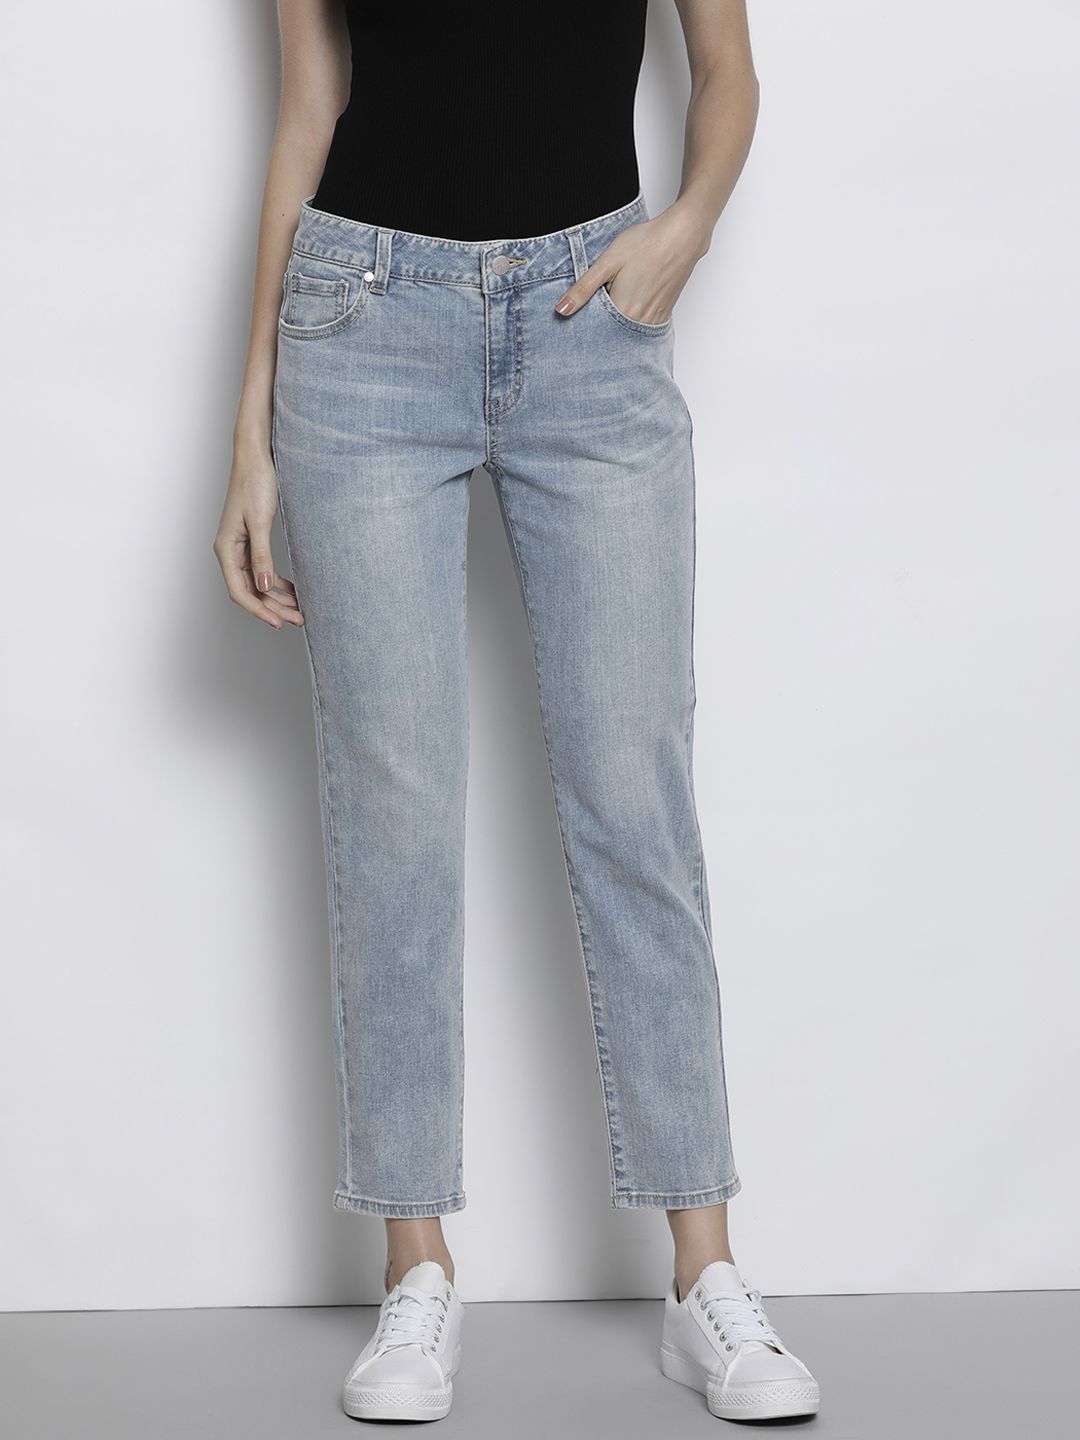 GUESS Women Blue Light Fade Stretchable Jeans Price in India